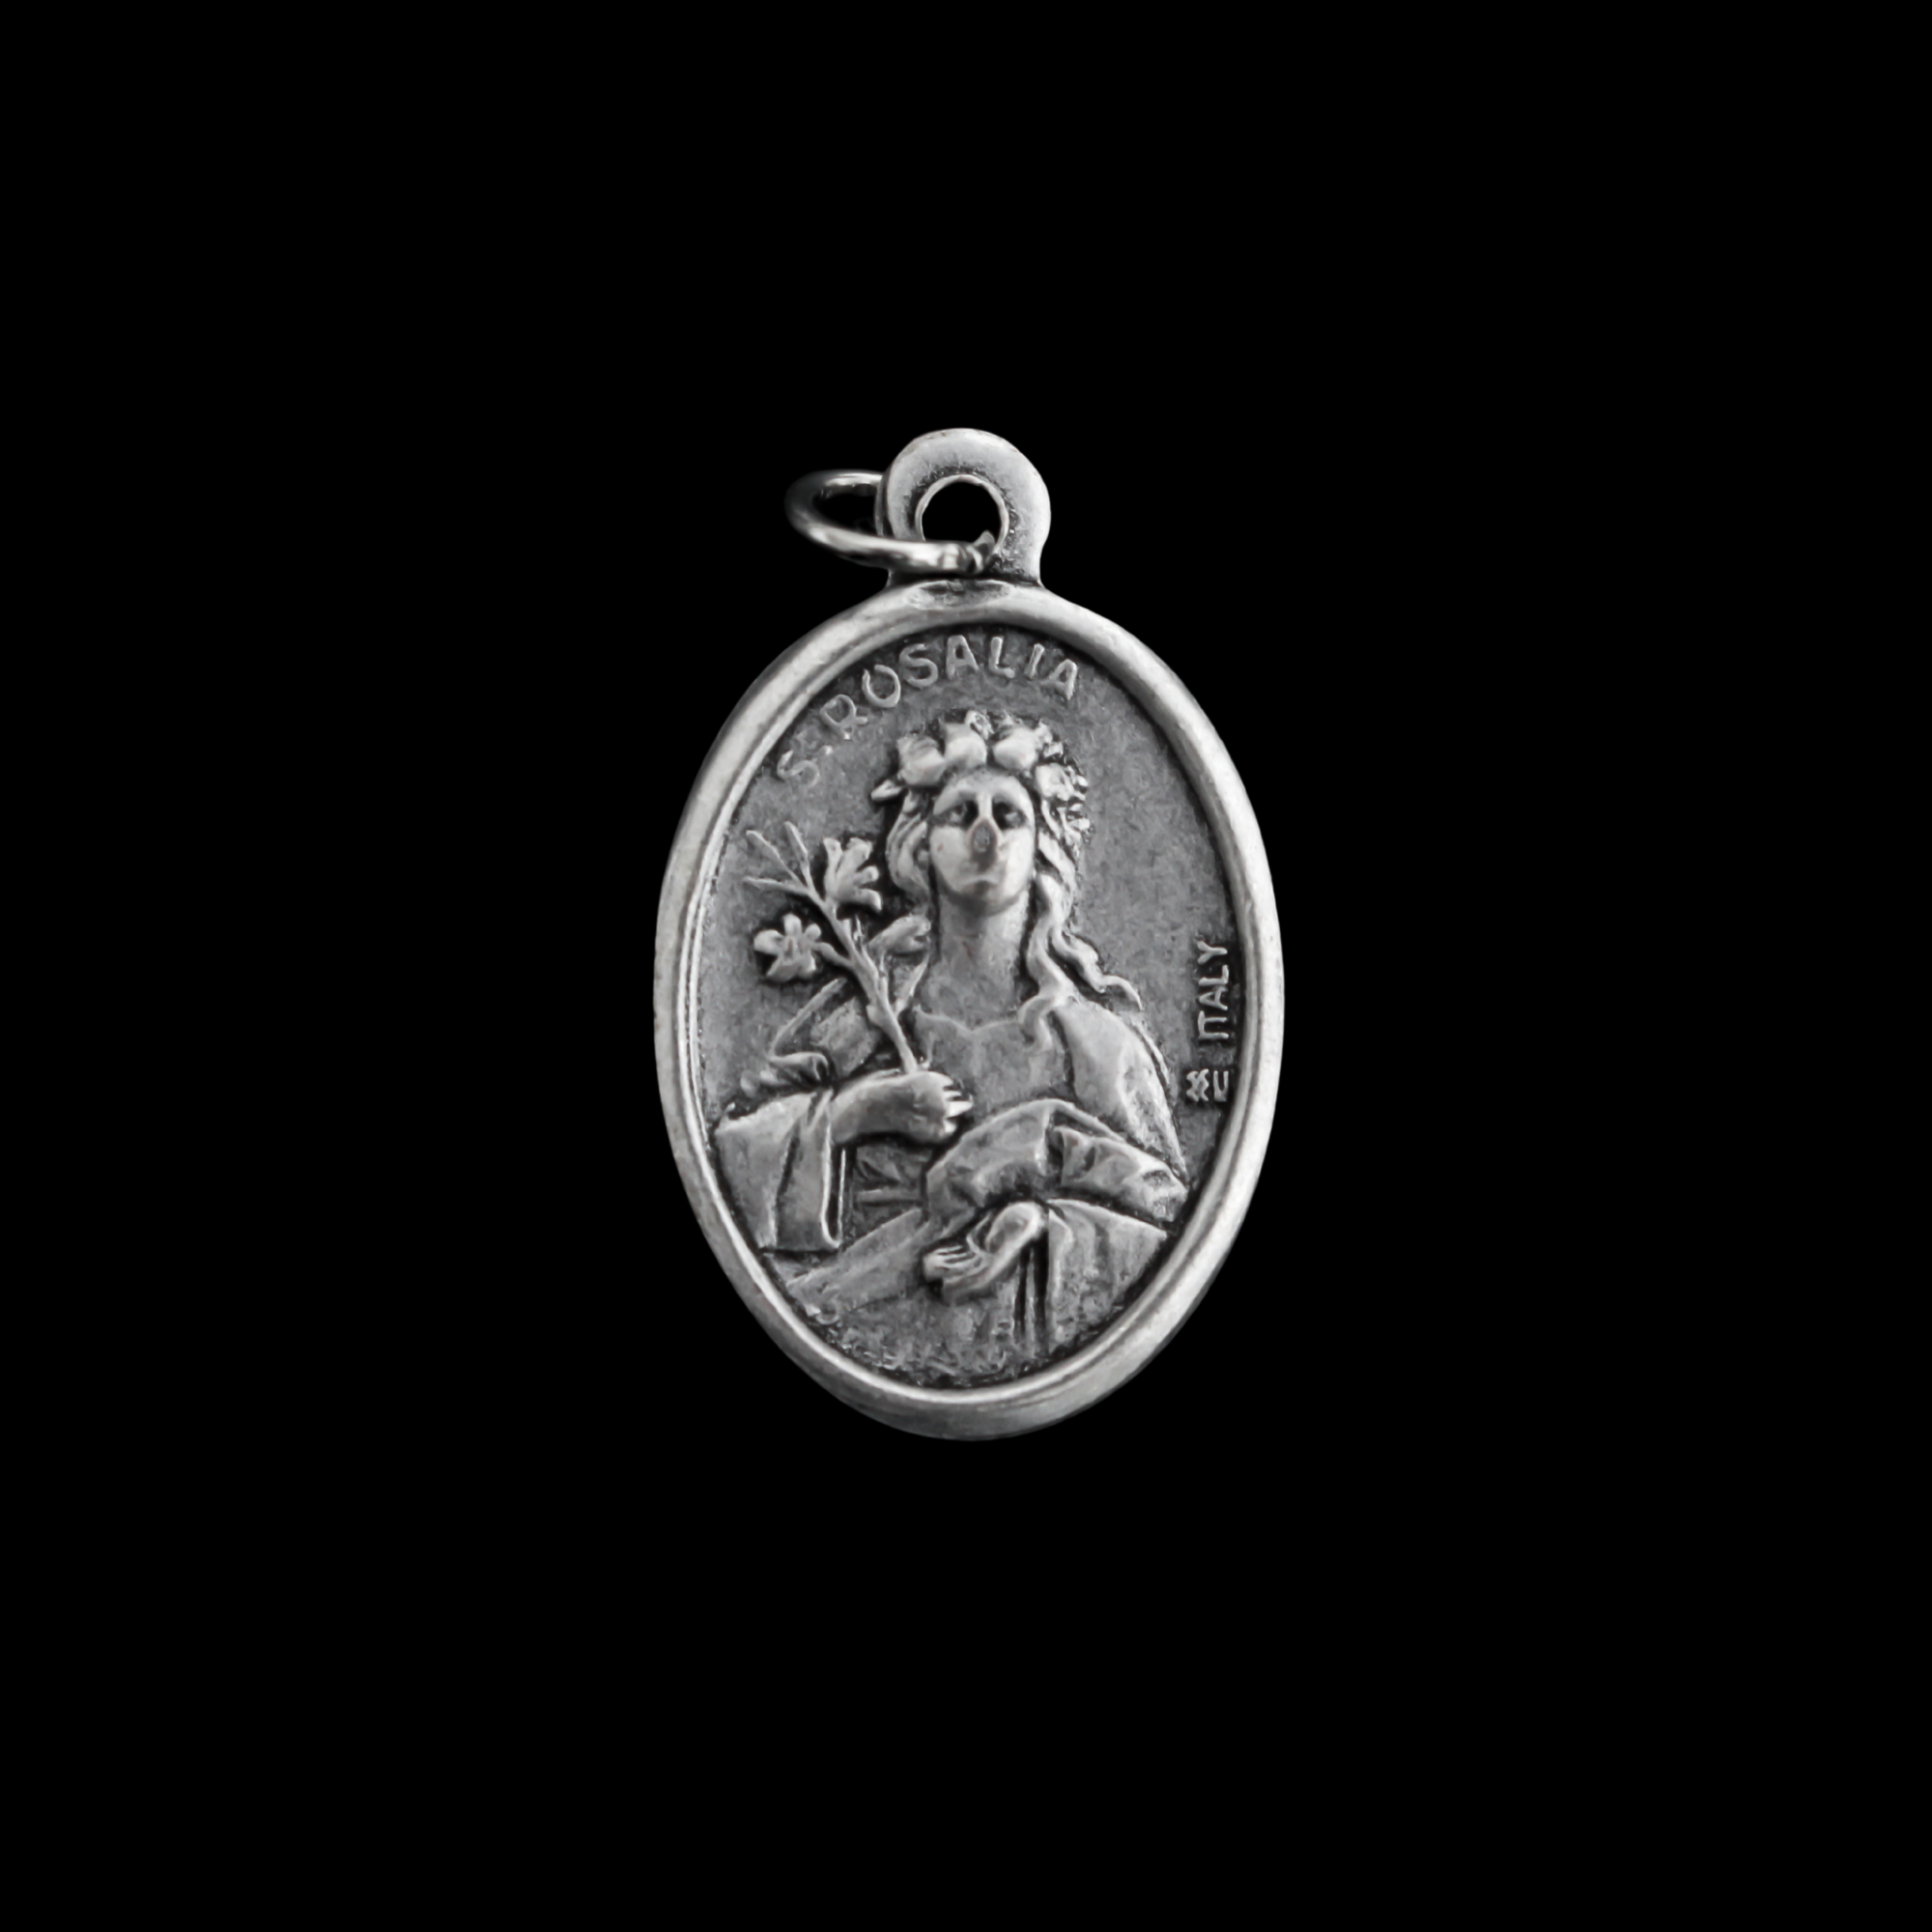 Saint Rosalia Medal - Patron of Palermo, Italy; Invoked in Times of Plagues